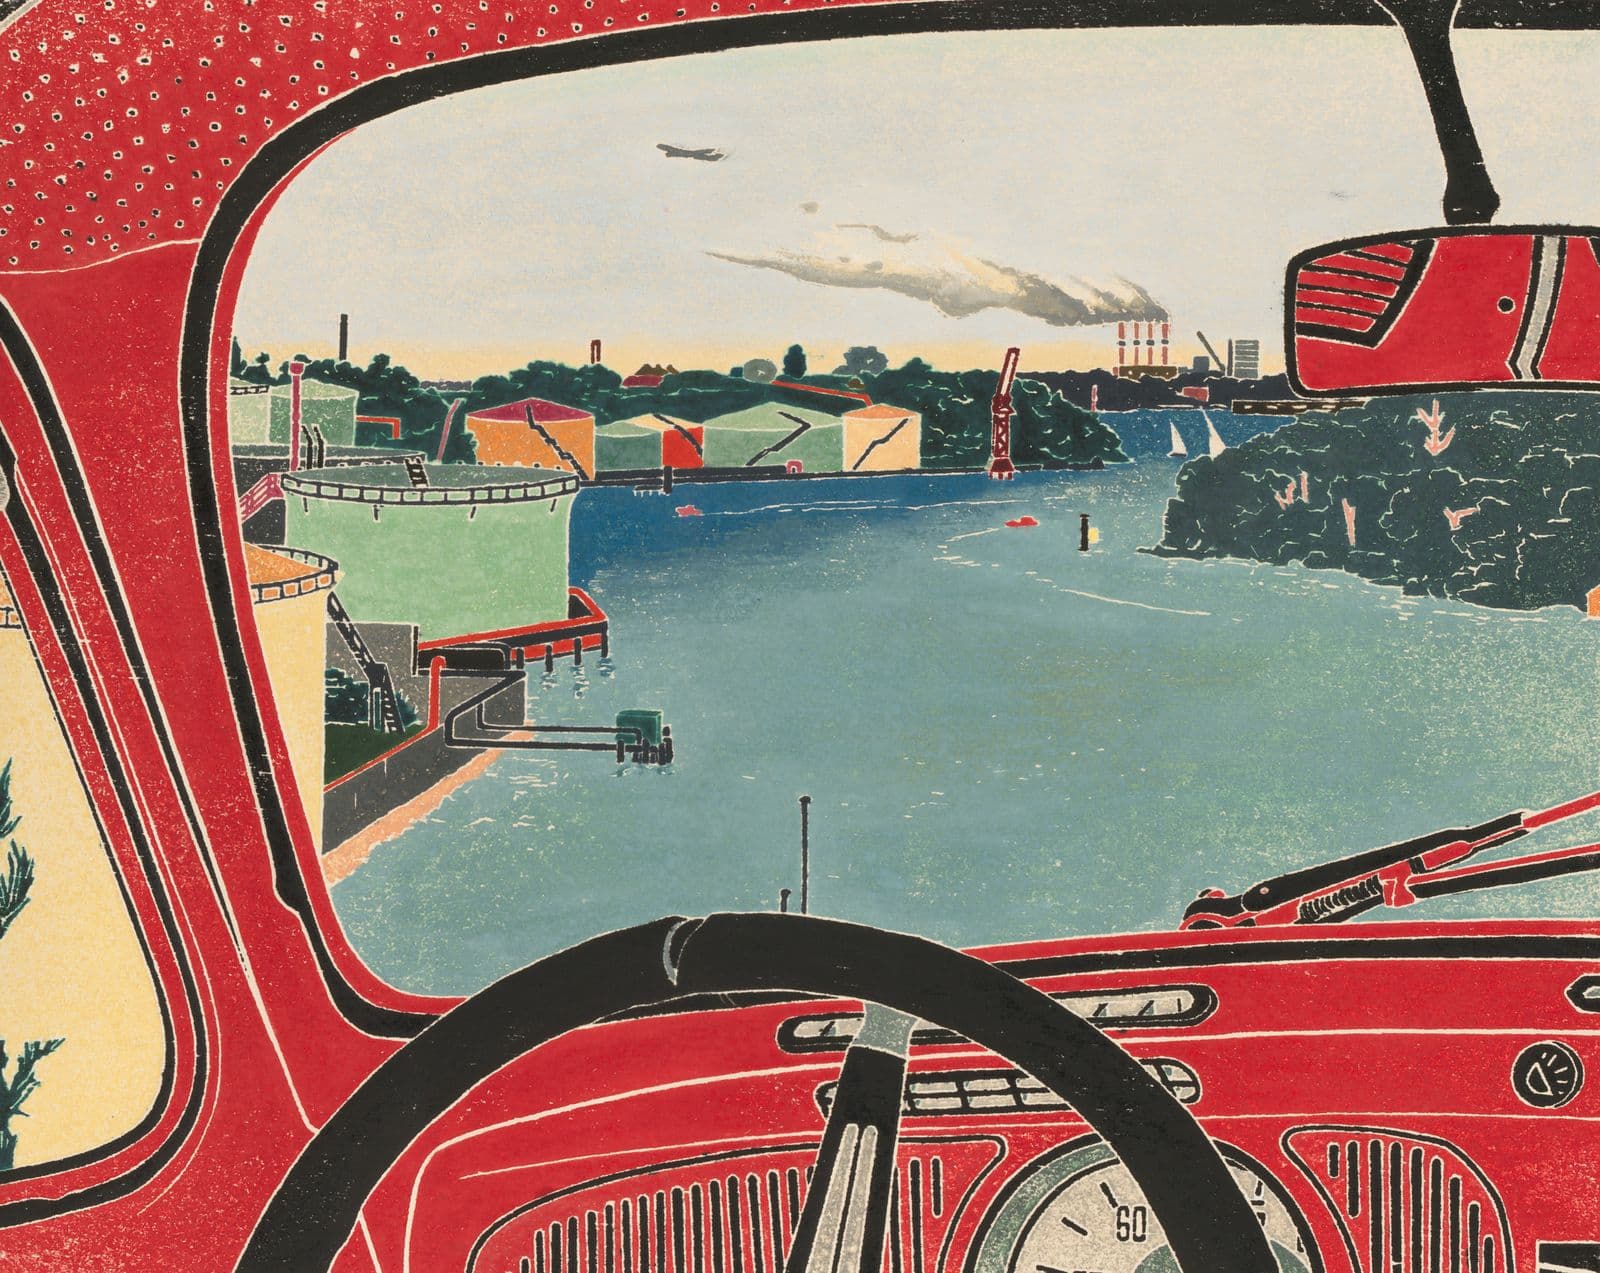 A print work of a red car interior looking out onto an industrial harbour